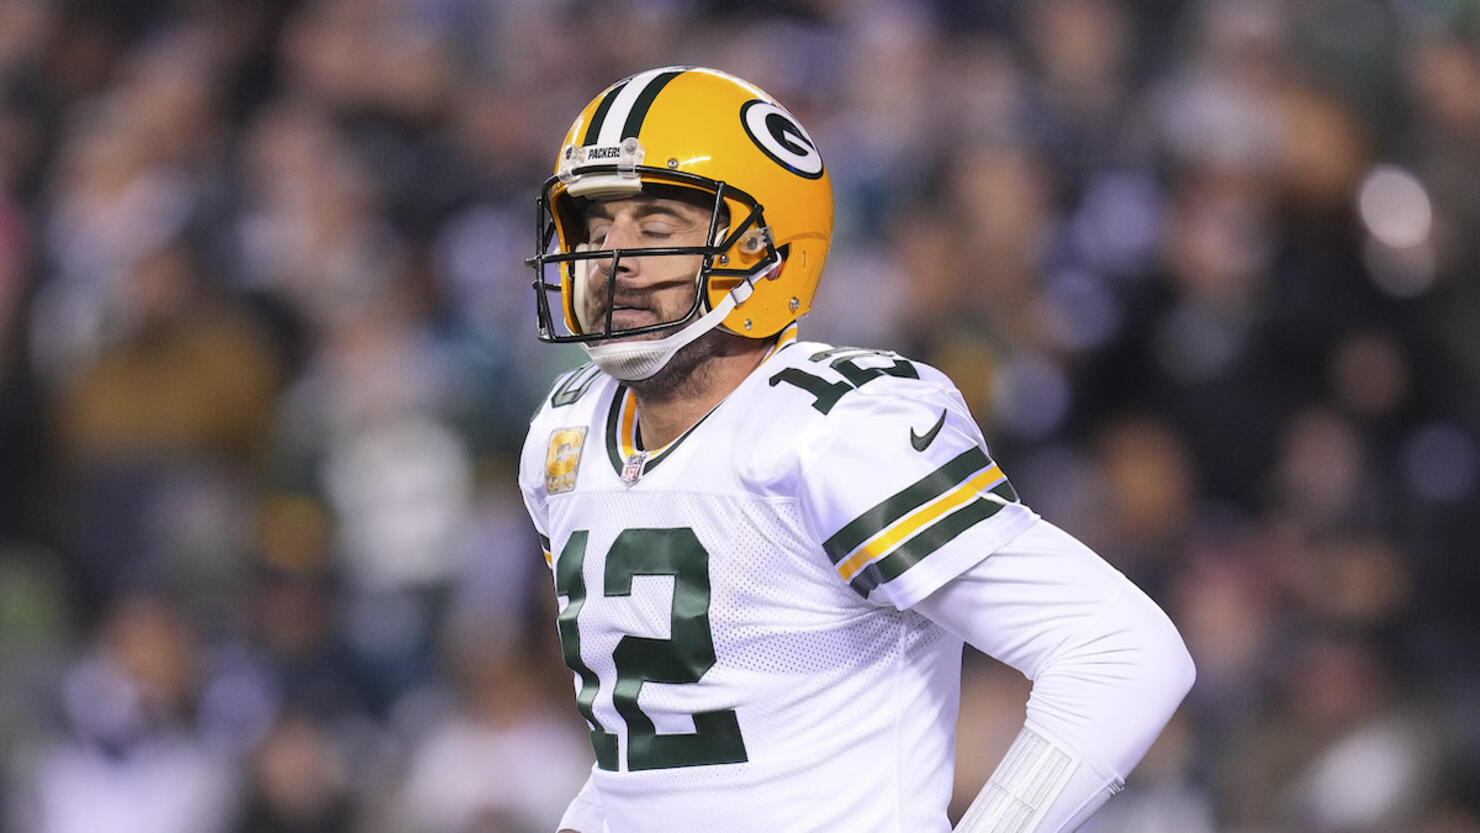 Aaron Rodgers hopes to have decision “sooner rather than later”